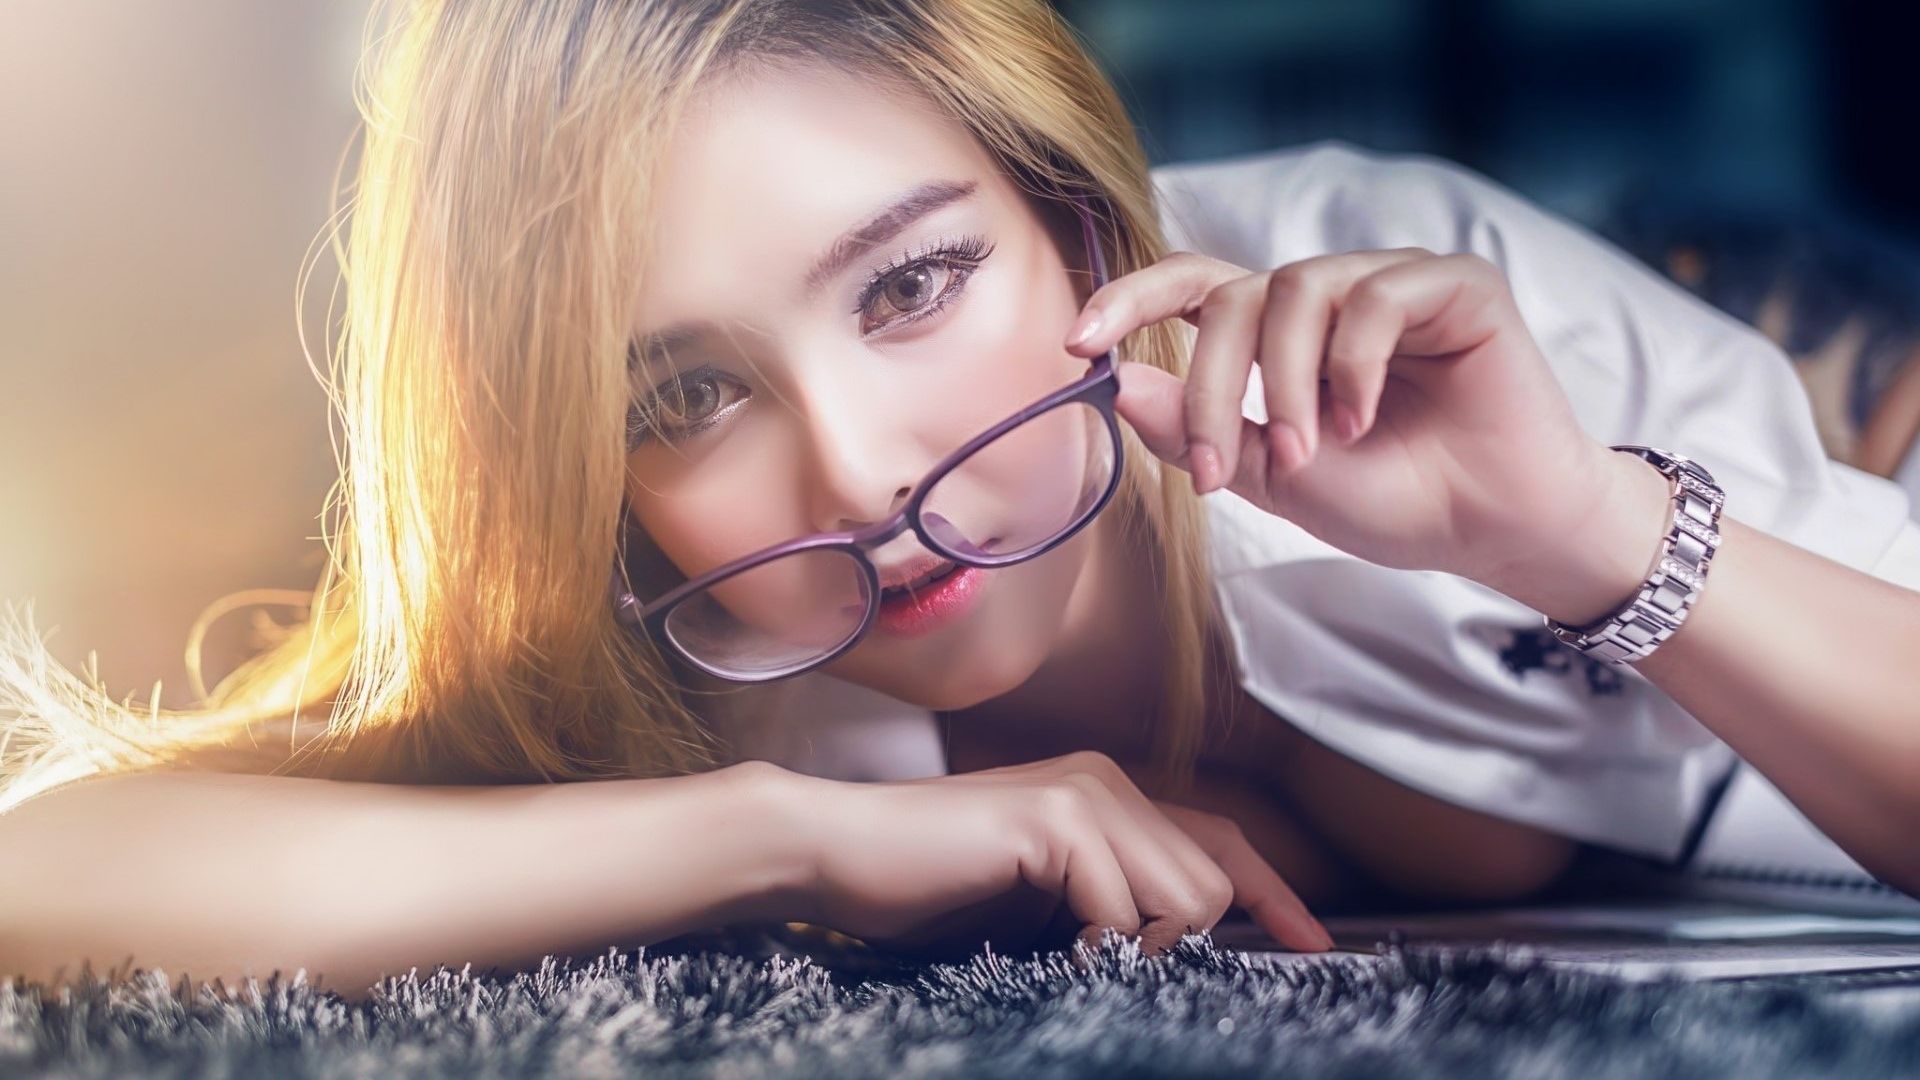 Wallpaper Asian women with glasses